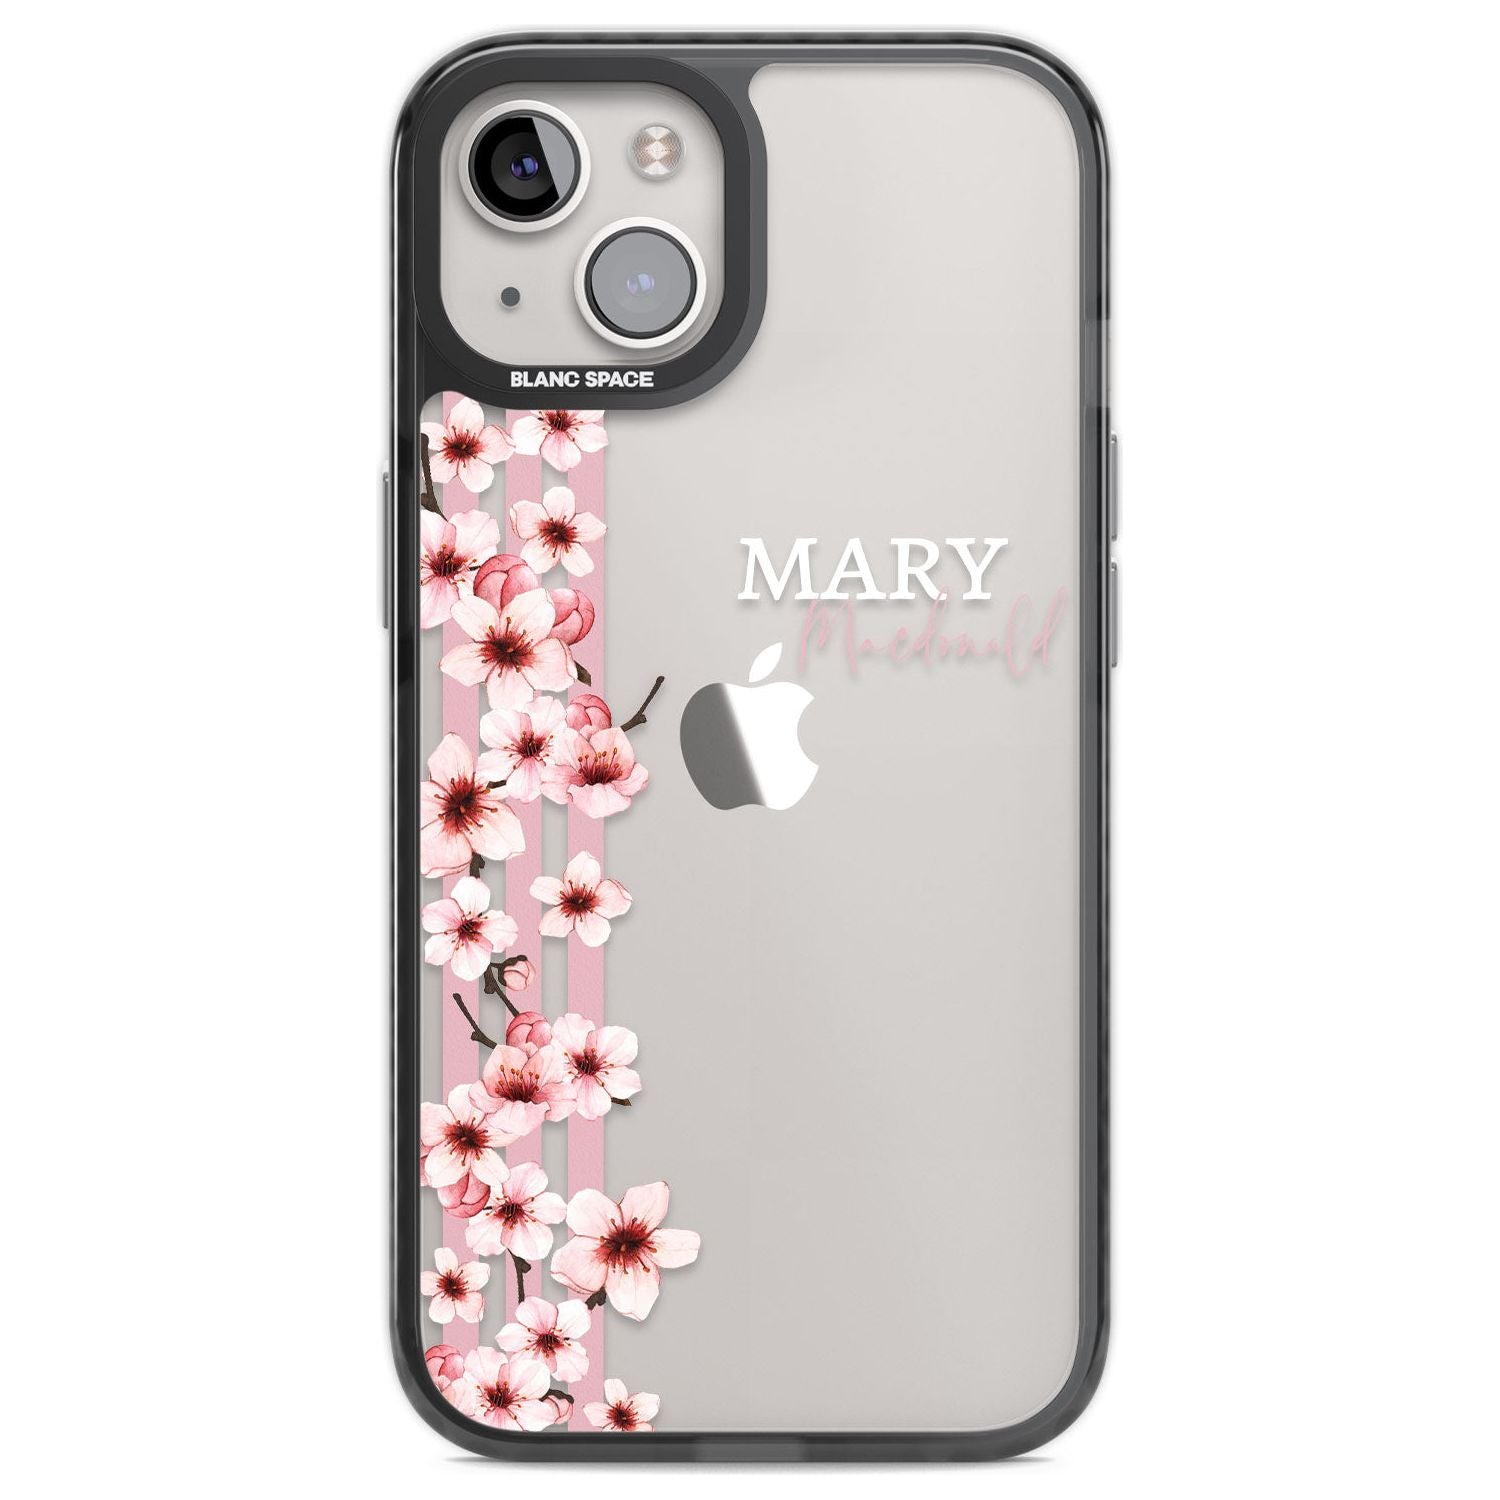 Personalised Cherry Blossoms & Stripes Custom Phone Case iPhone 12 / Black Impact Case,iPhone 13 / Black Impact Case,iPhone 12 Pro / Black Impact Case,iPhone 14 / Black Impact Case,iPhone 15 Plus / Black Impact Case,iPhone 15 / Black Impact Case Blanc Space